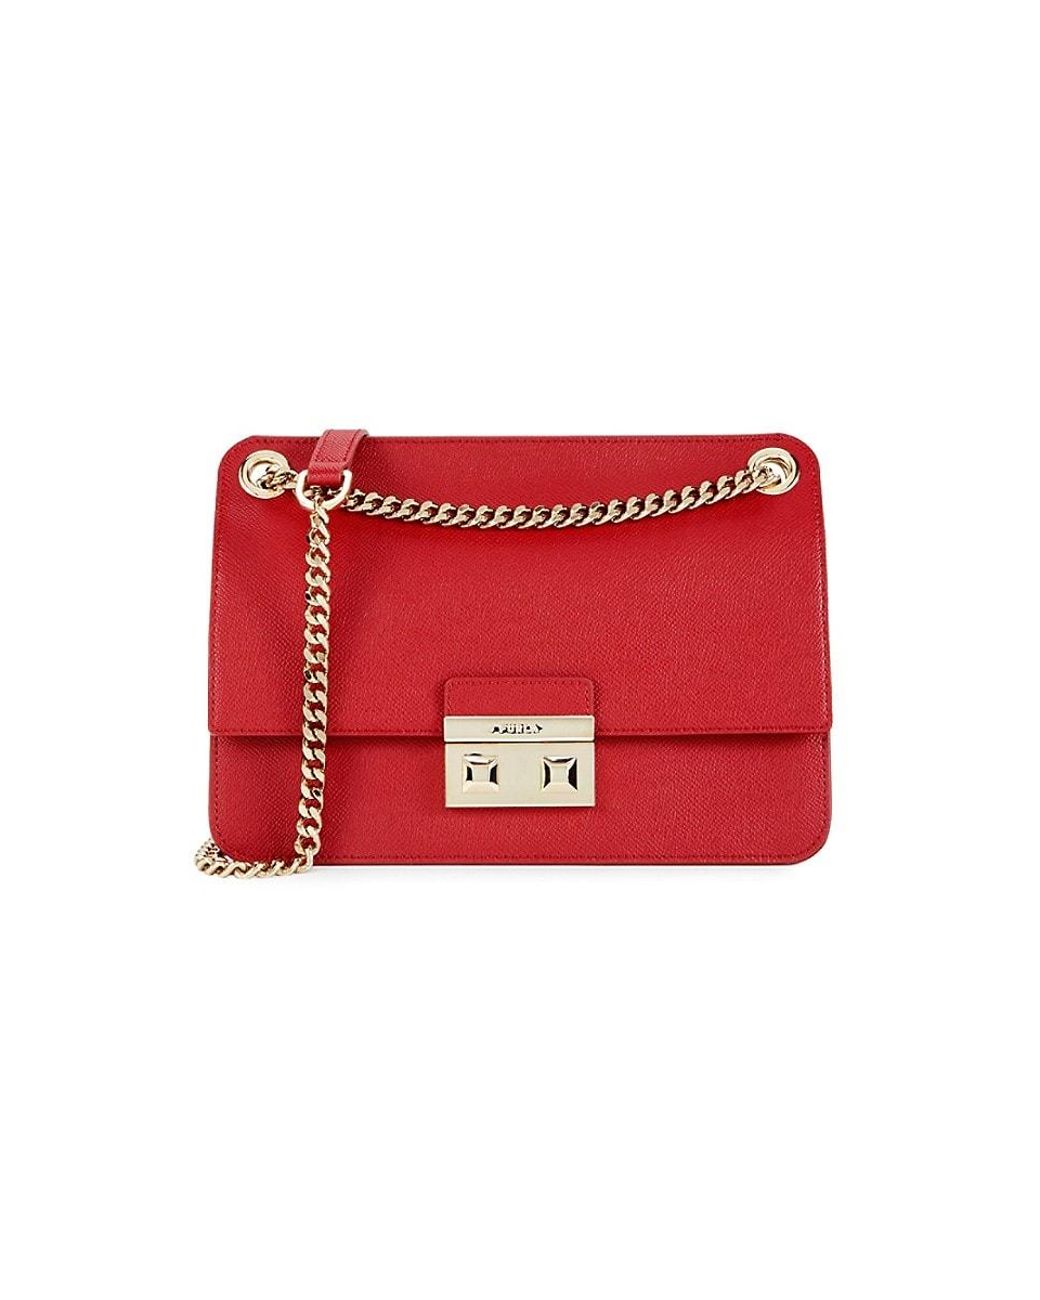 Furla Bella Small Leather Crossover Bag in Red | Lyst